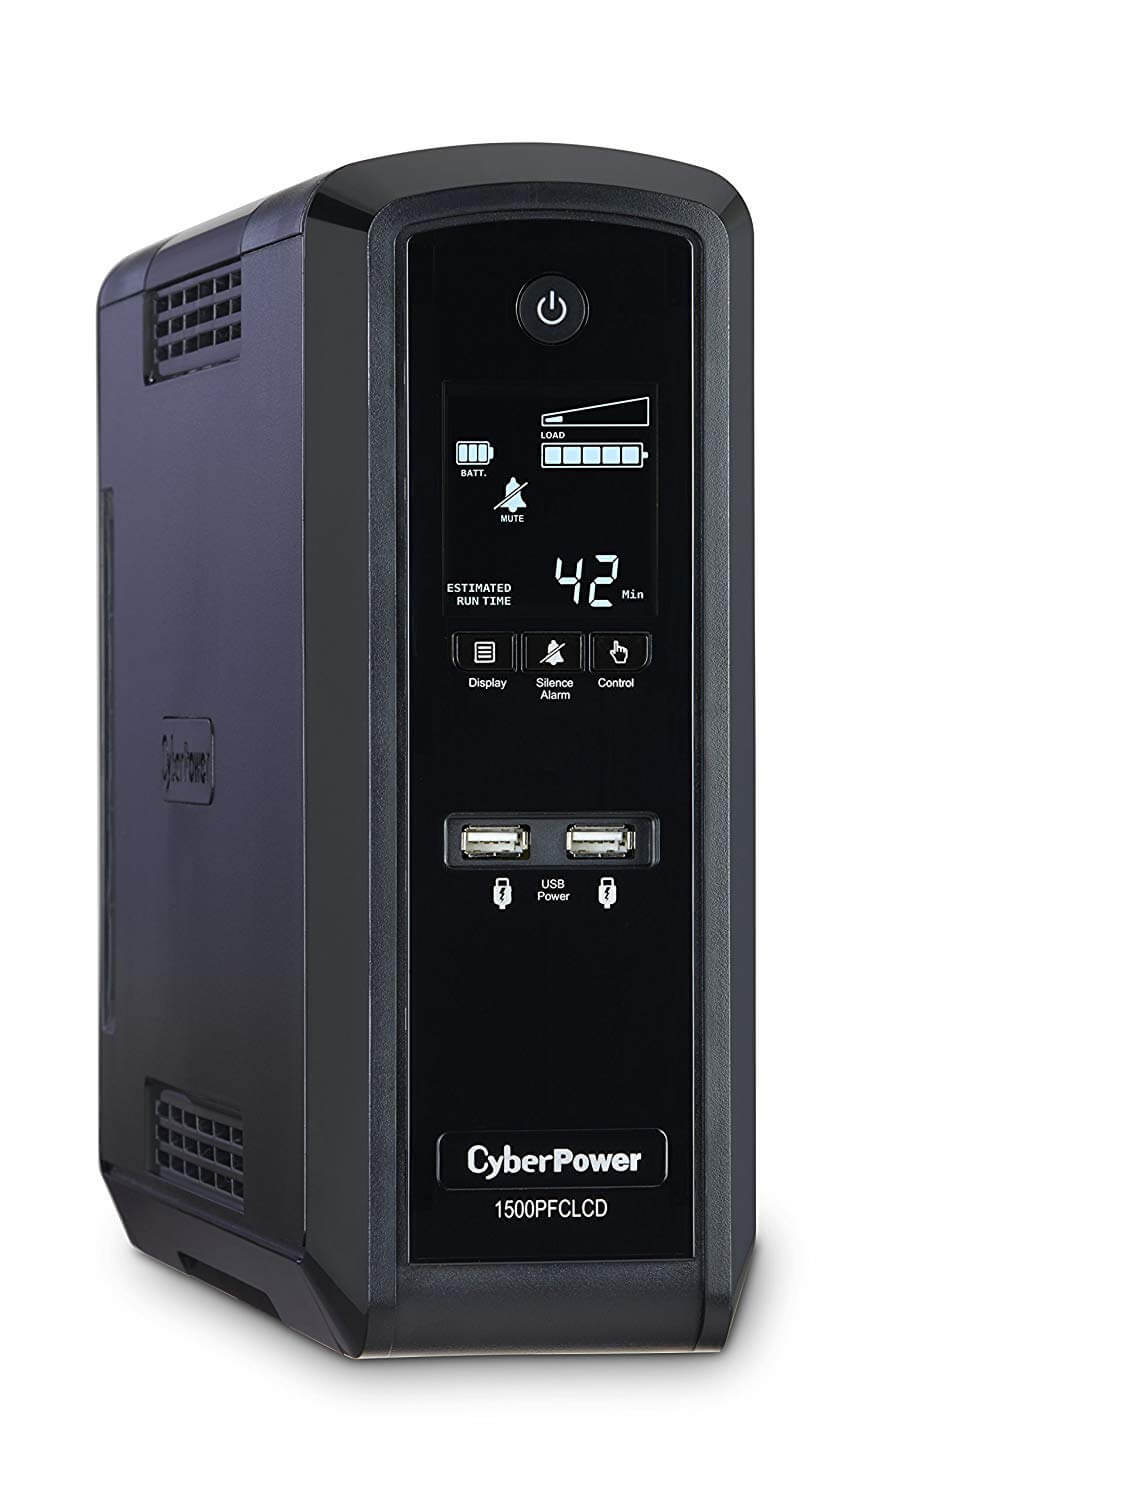 CyberPower's CP1500PFCLCD is our pick for the best gaming PC UPS solution on a mild budget.